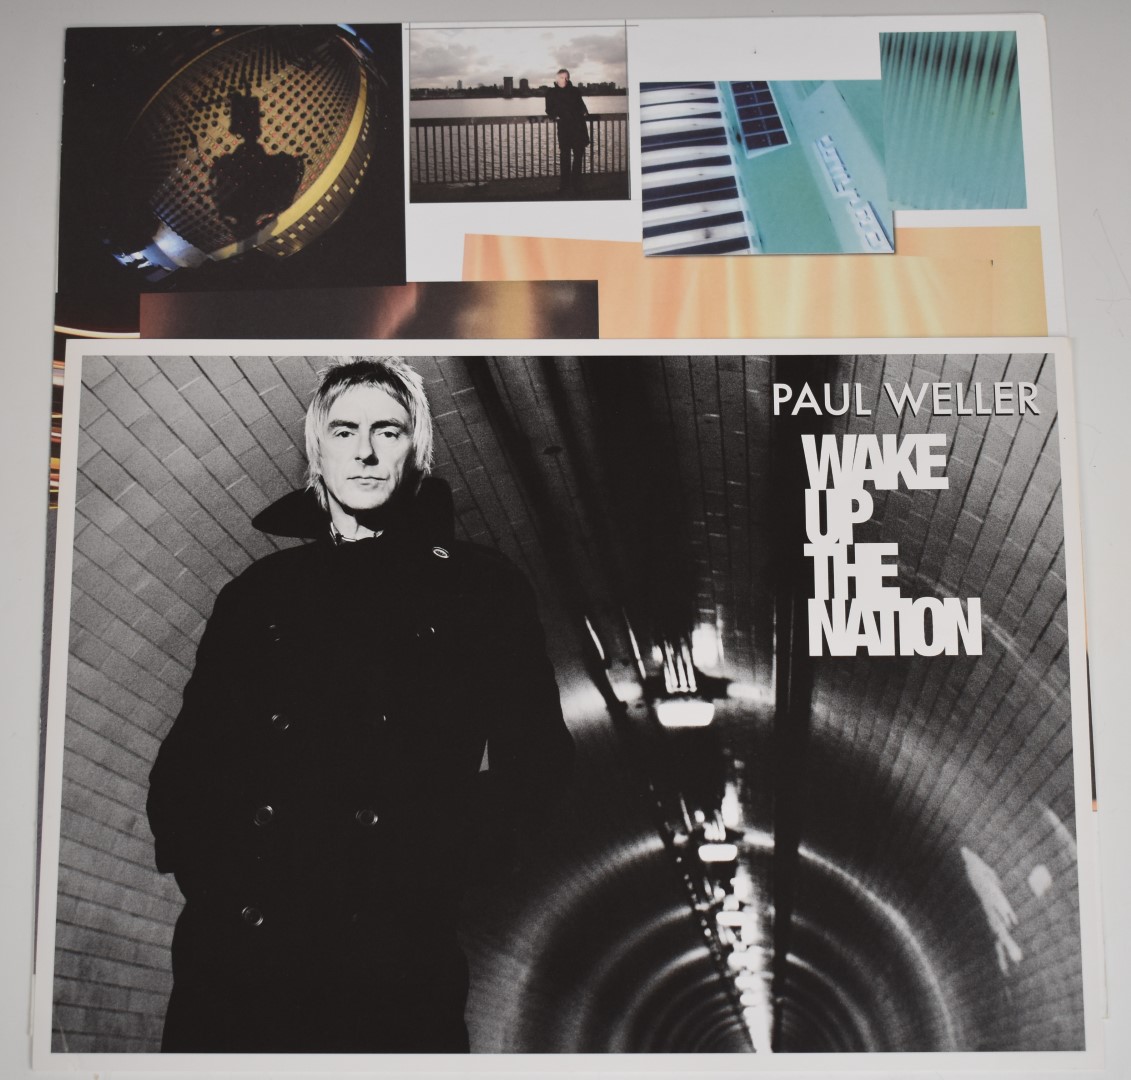 Paul Weller - Wake Up The Nation (2732868). Record, insert, photo and cover appear EX - Image 3 of 3